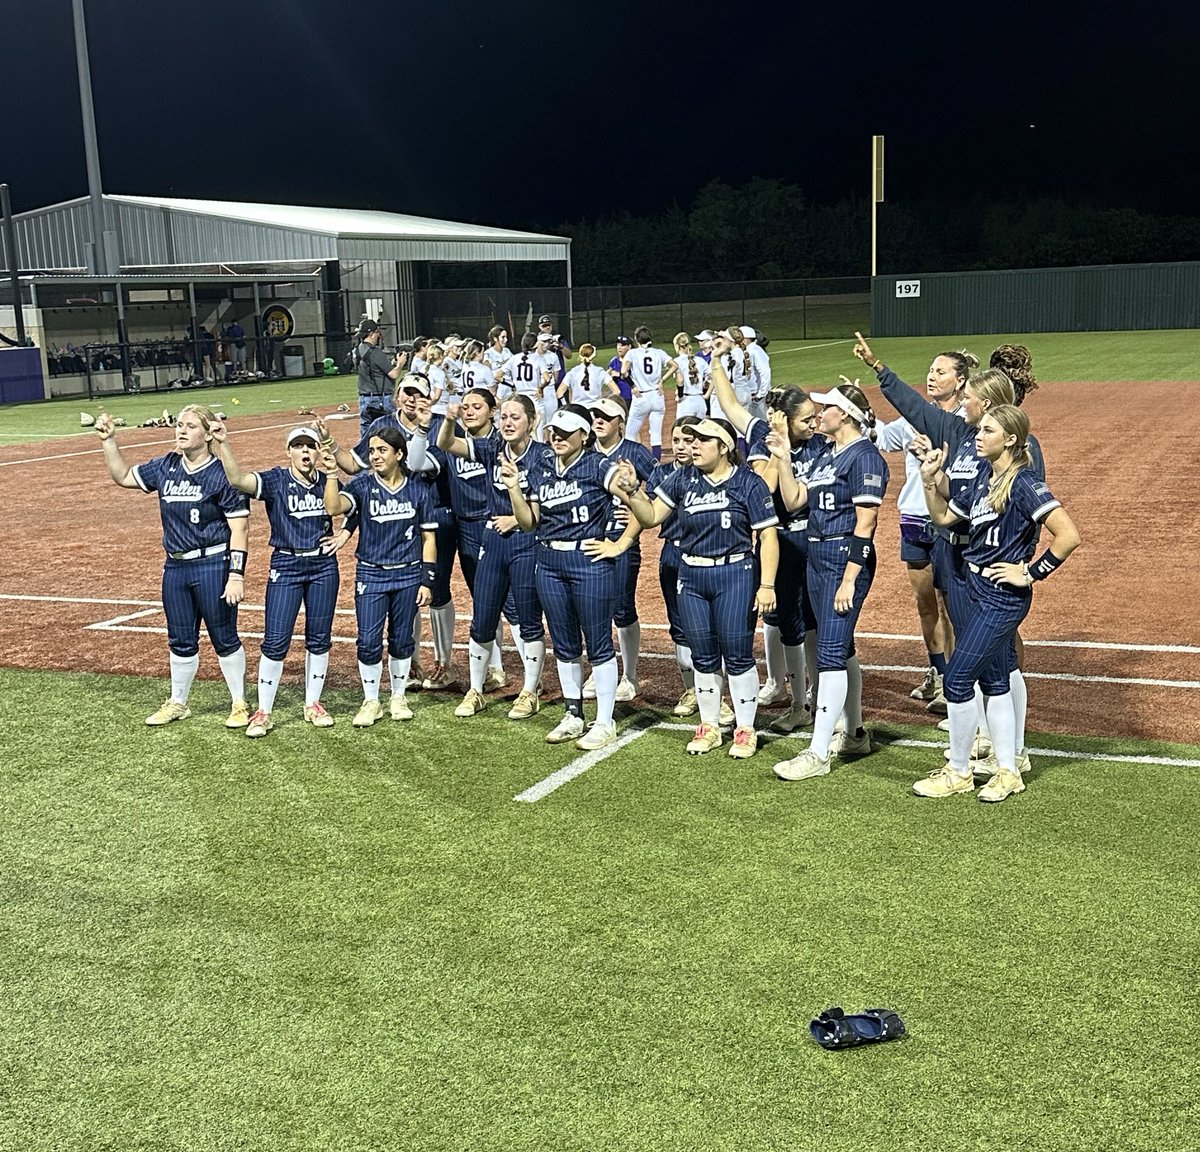 Rangers drop a tough game 3 to a talented Liberty Hill team, 7-8. To say we’re proud of what these girls accomplished is an understatement. Way to play with heart, discipline, and total team effort all season long! Rangers we will be! 💙👆🏼🤍